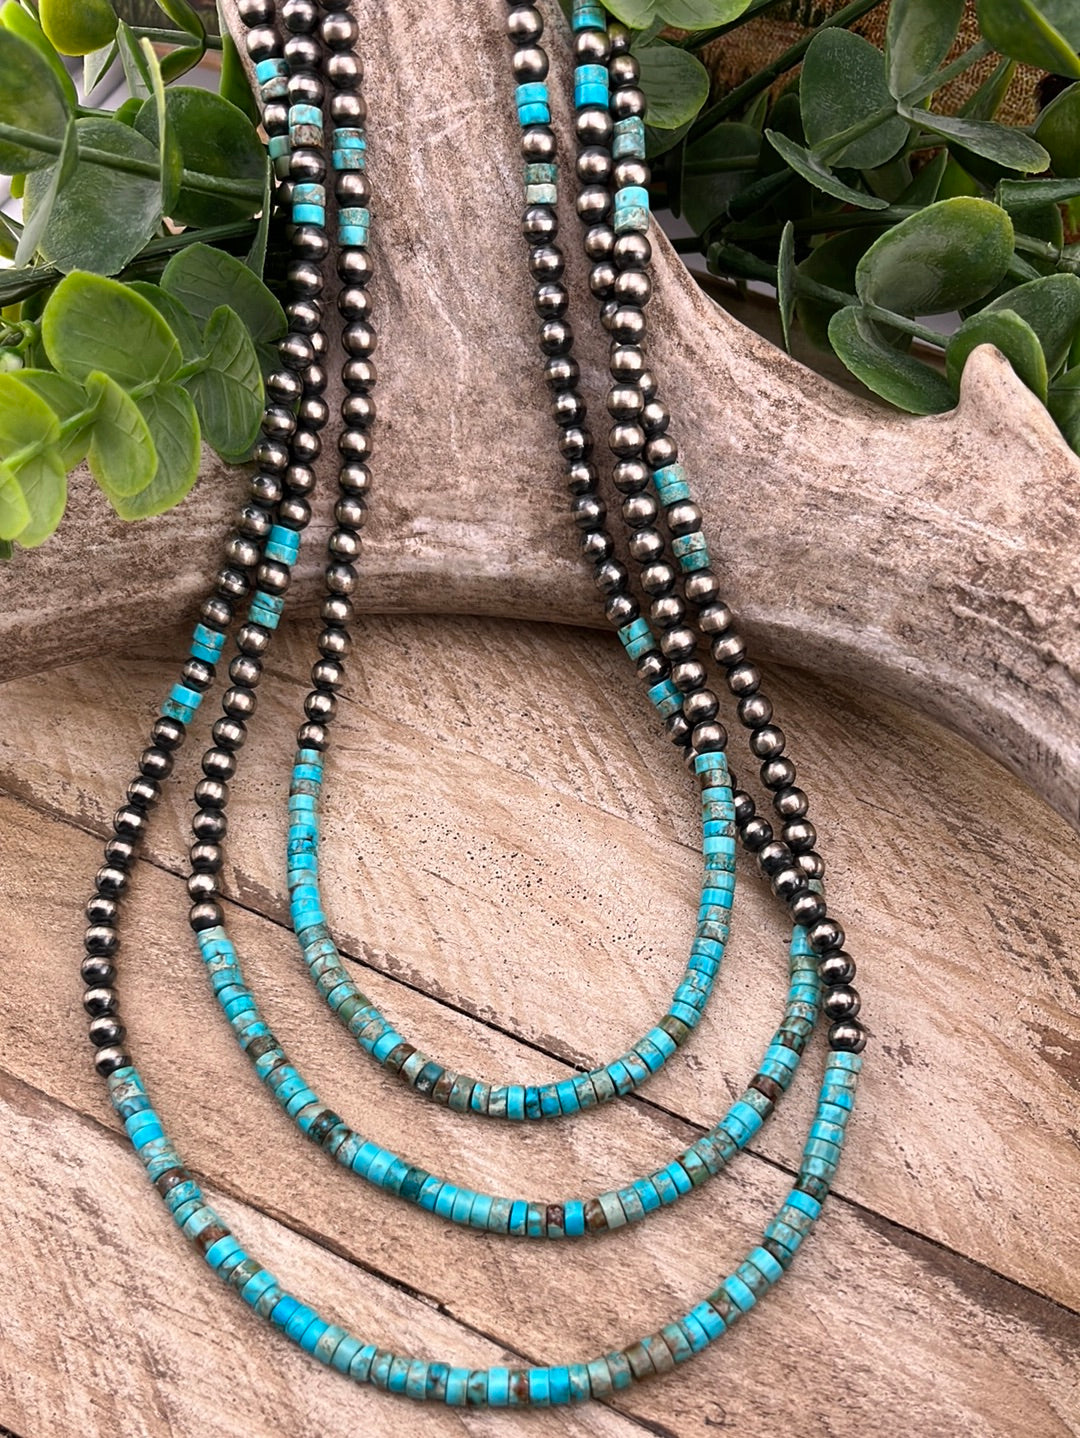 Klein Black Cord Necklace With Sterling Concho & 12mm Navajo Beads - 20